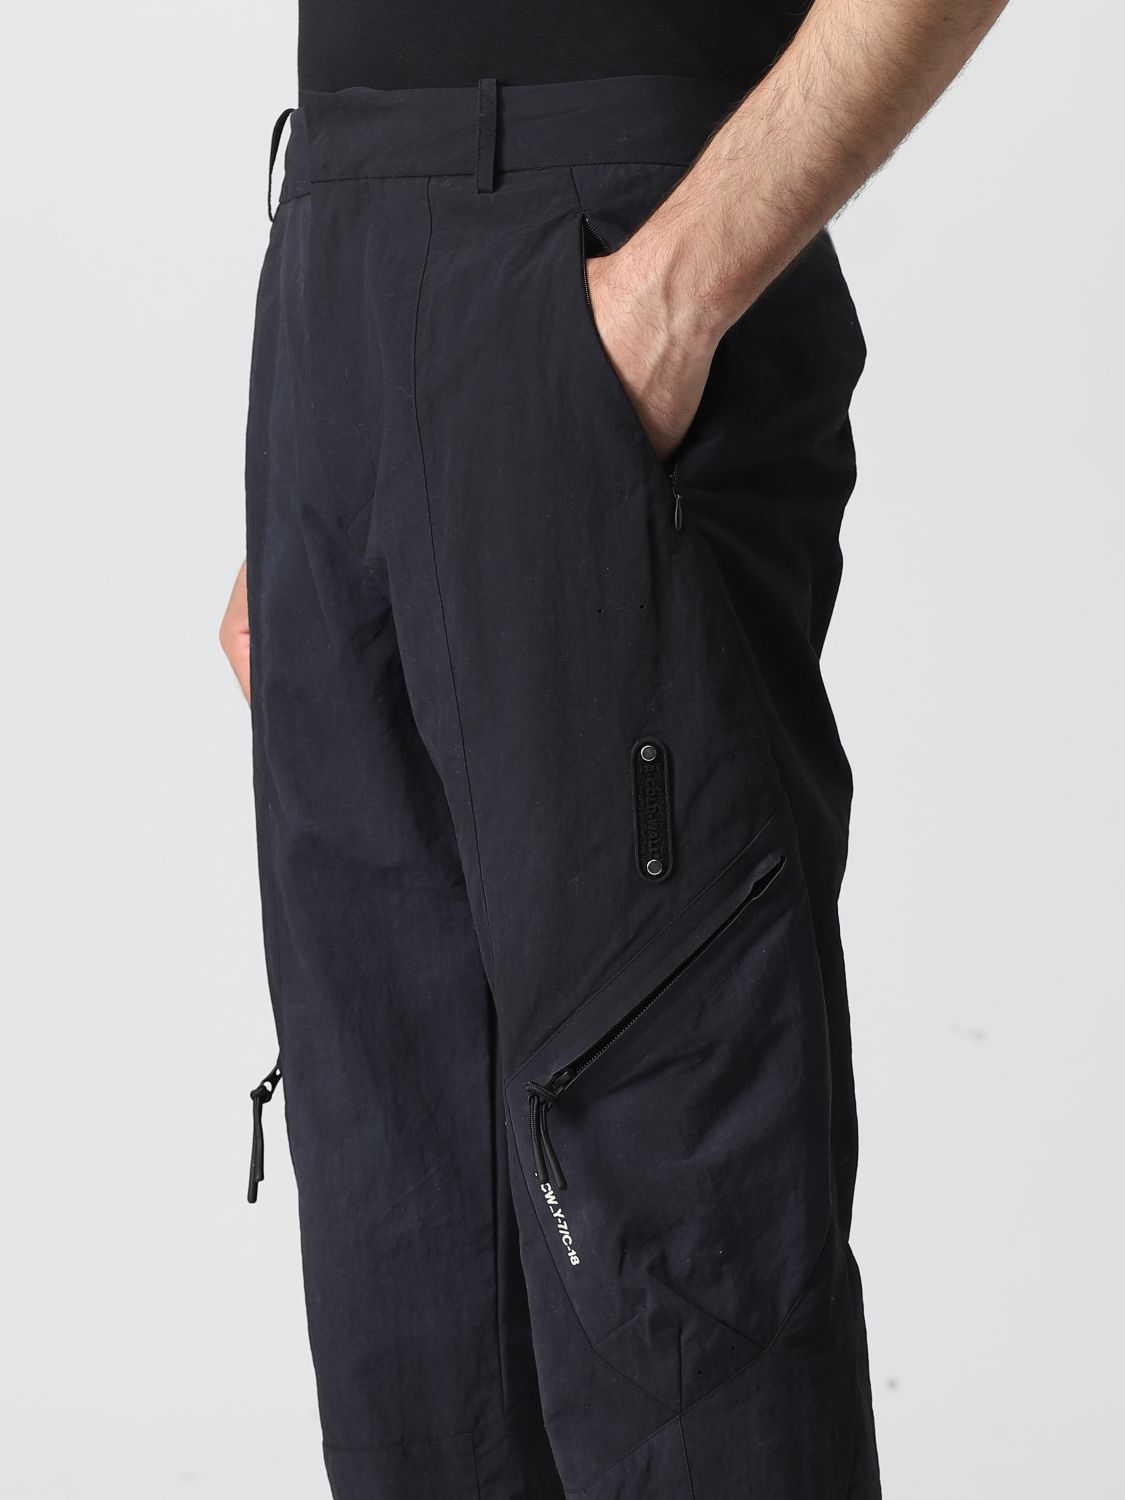 A-COLD-WALL*: pants for man - Charcoal | A-Cold-Wall* pants MB181 ...